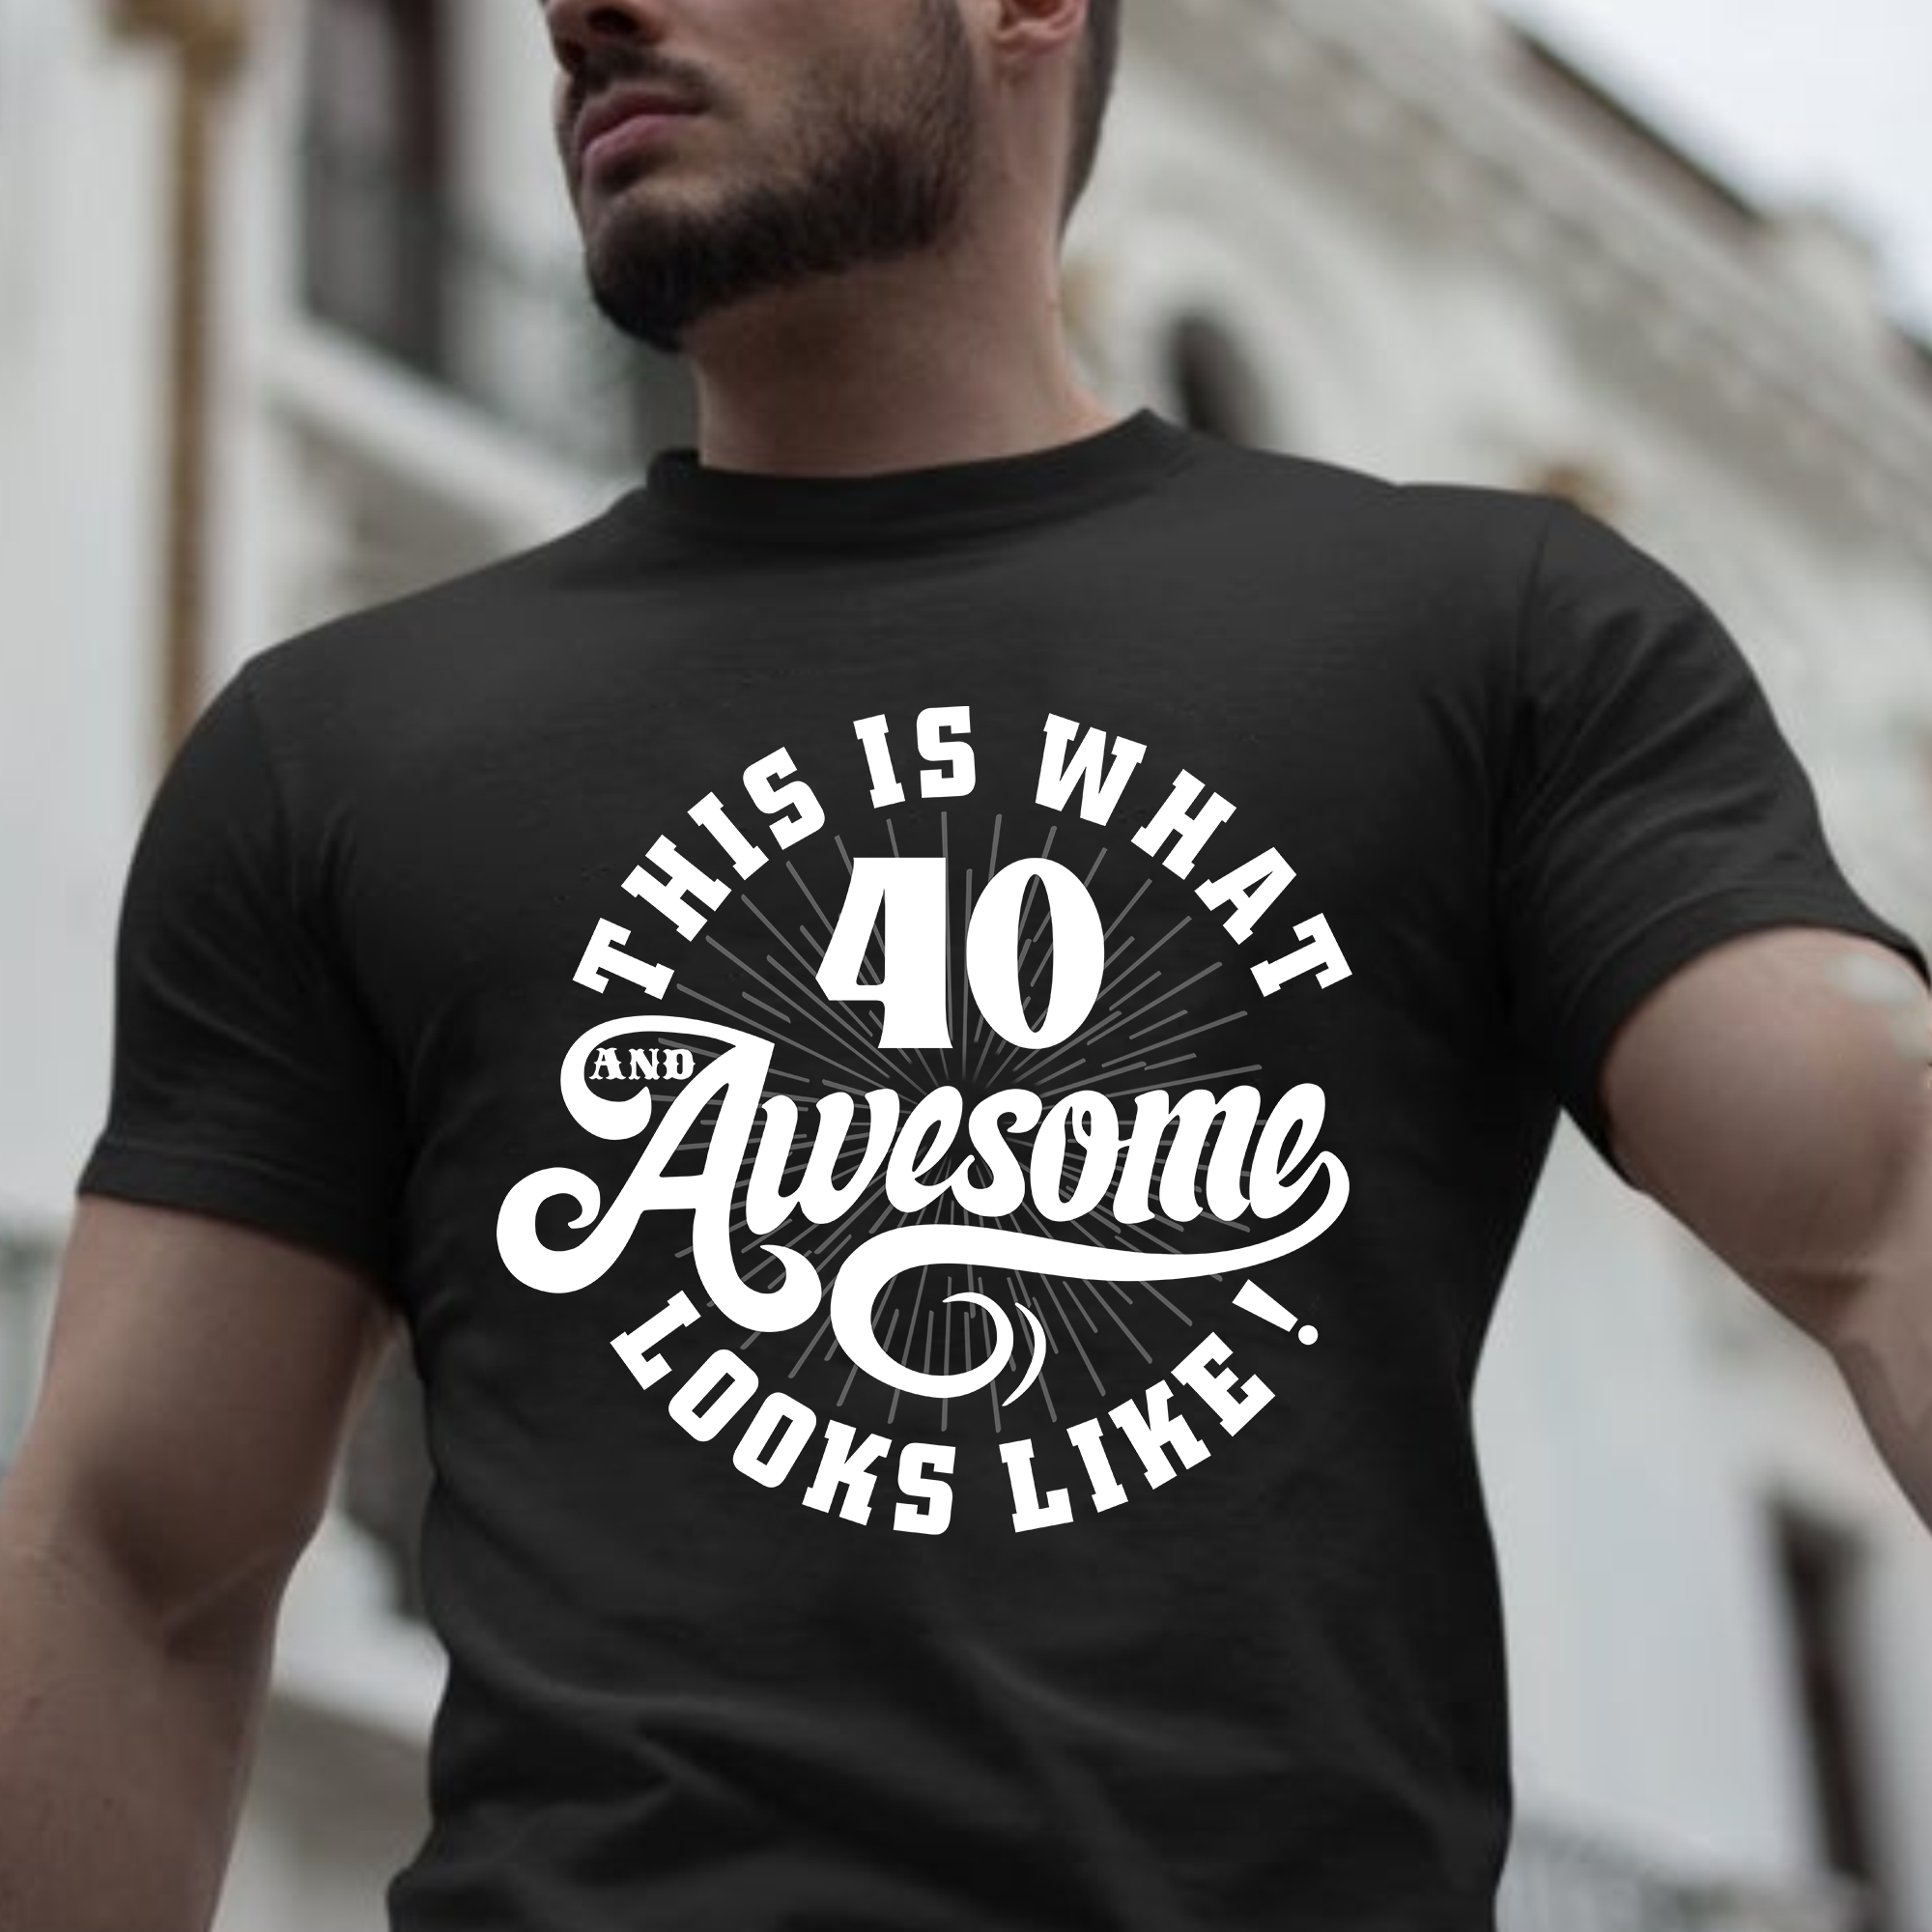 This Is What 40 Awesome Looks Like – Happy 40th Birthday Shirt